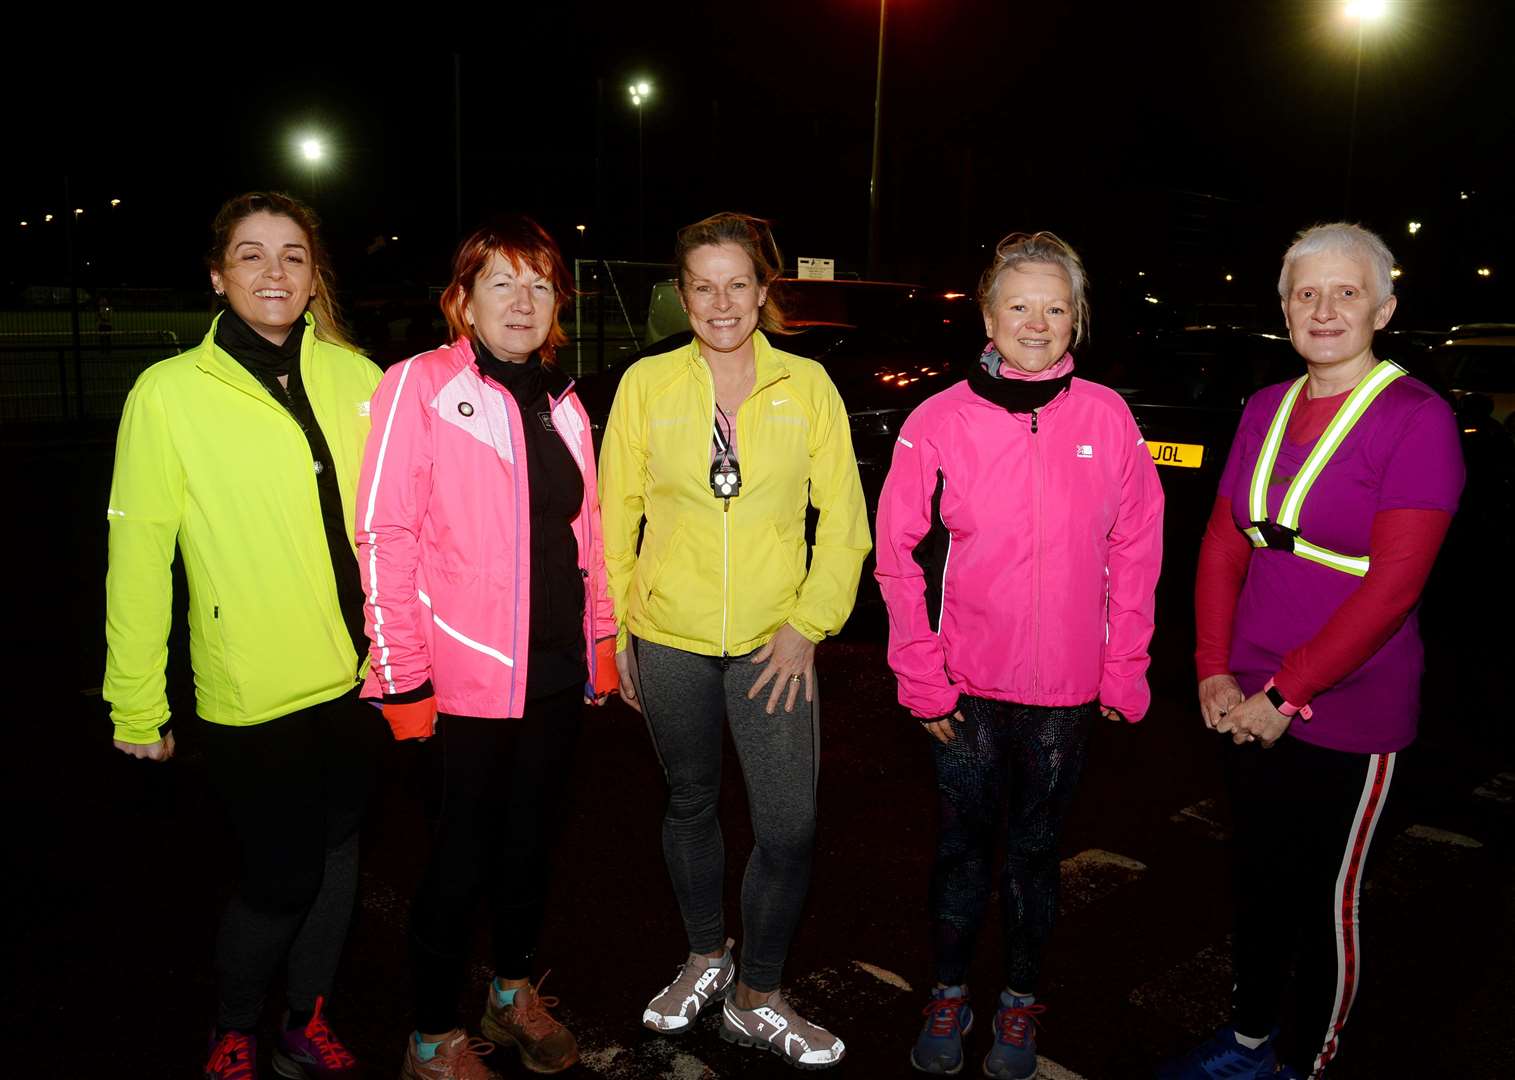 Ready for the off are Sarah MacKay, Fiona Duncan, Susan Robertson, Siobhan MacBean and Janet Campbell.